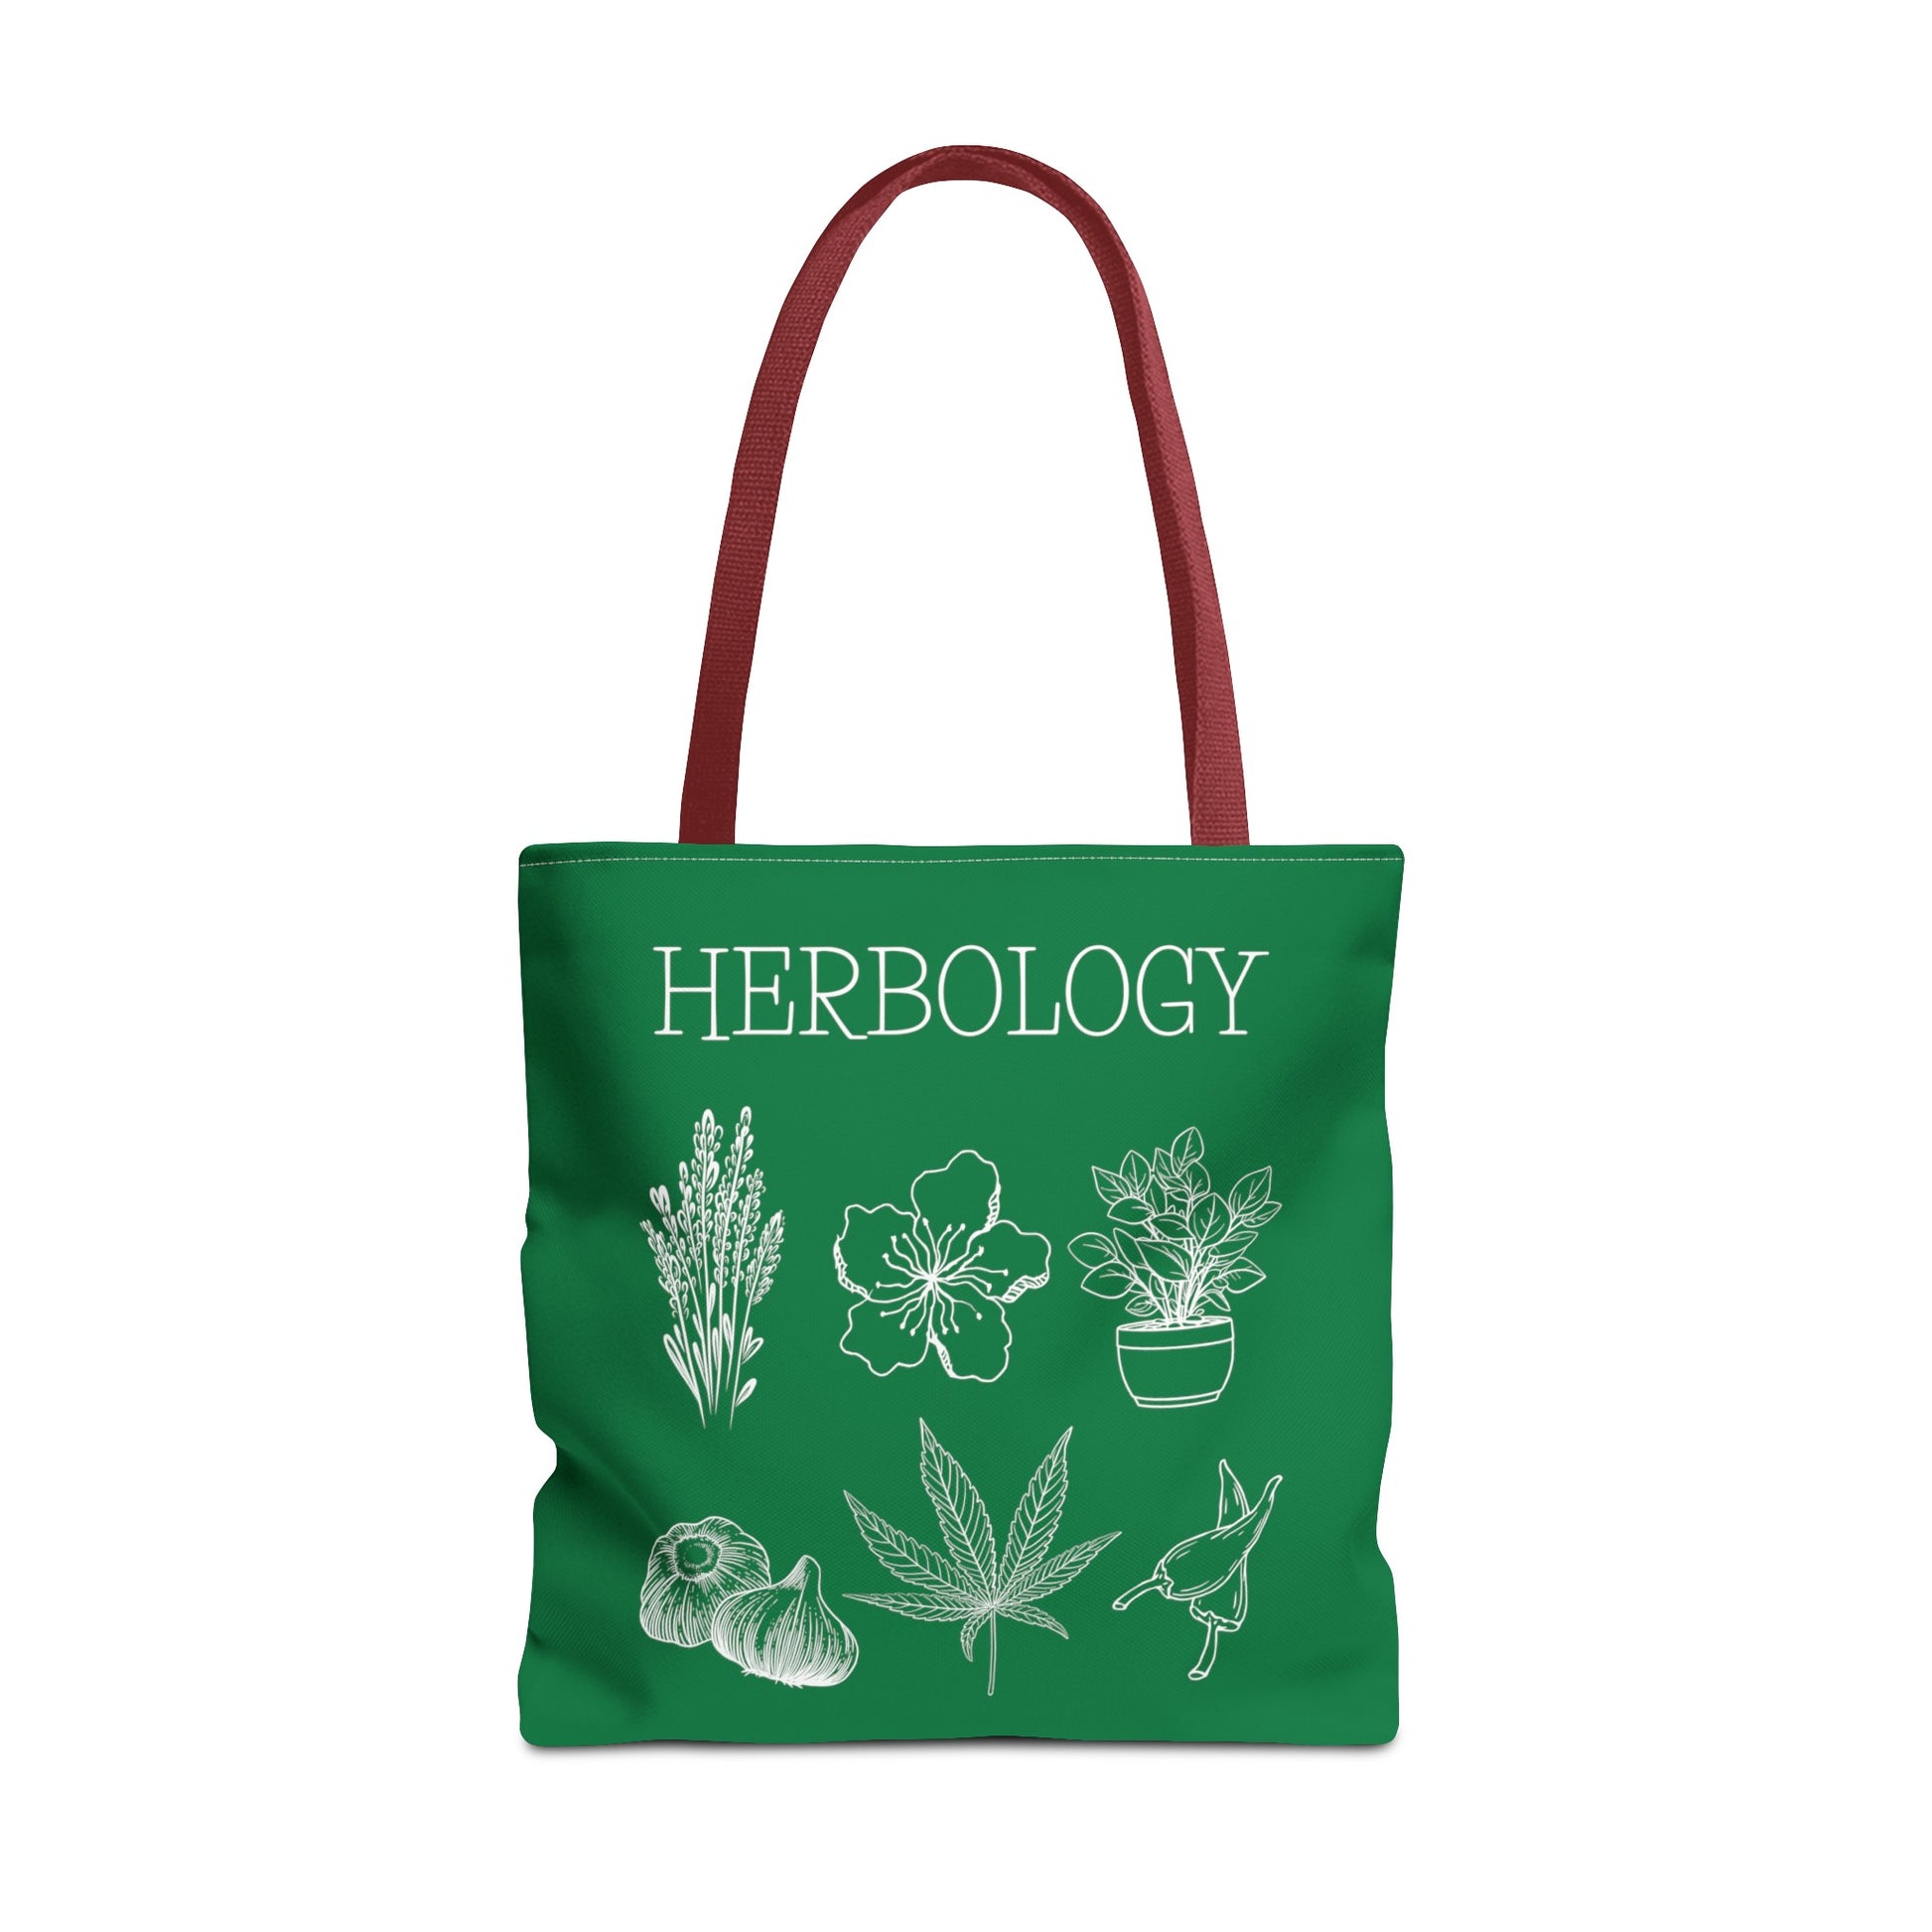 Magical-themed accessory to embrace your wizarding world spirit. Herbology class shoulder bag in green with red handle.